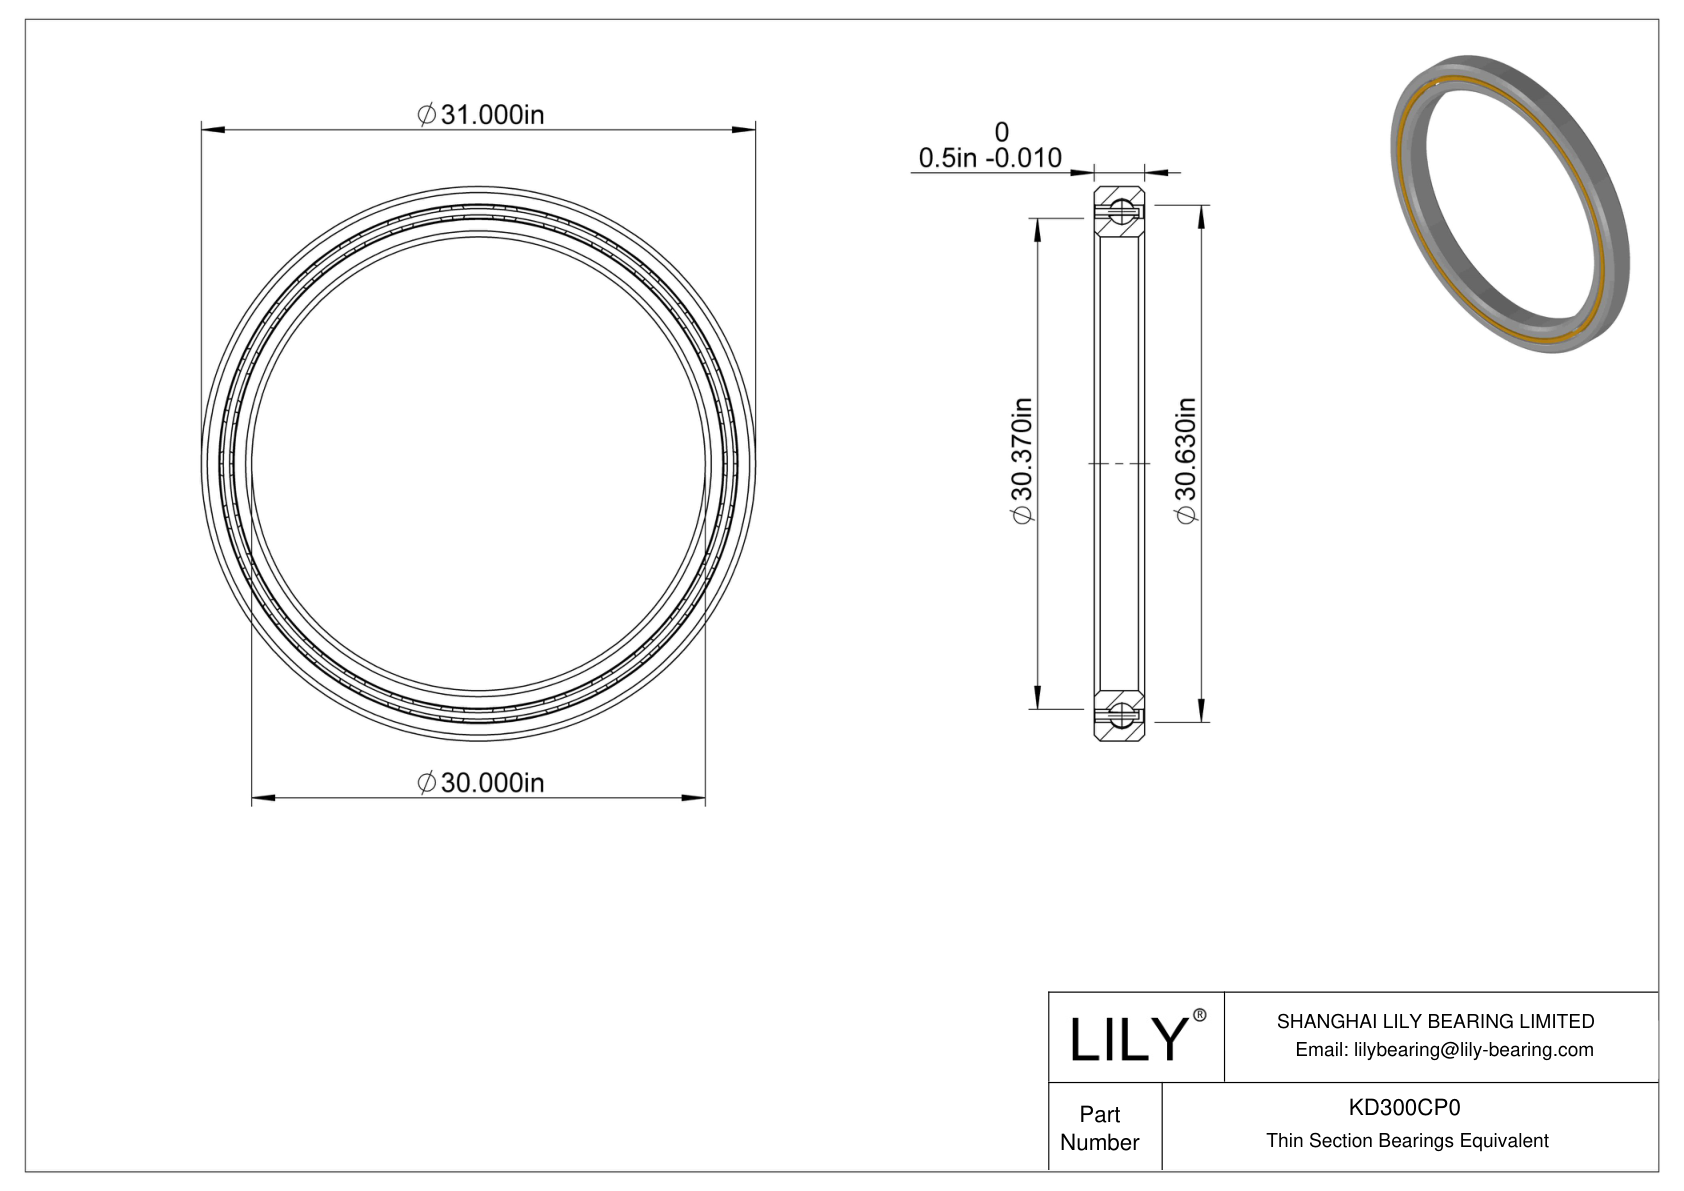 KD300CP0 Constant Section (CS) Bearings cad drawing